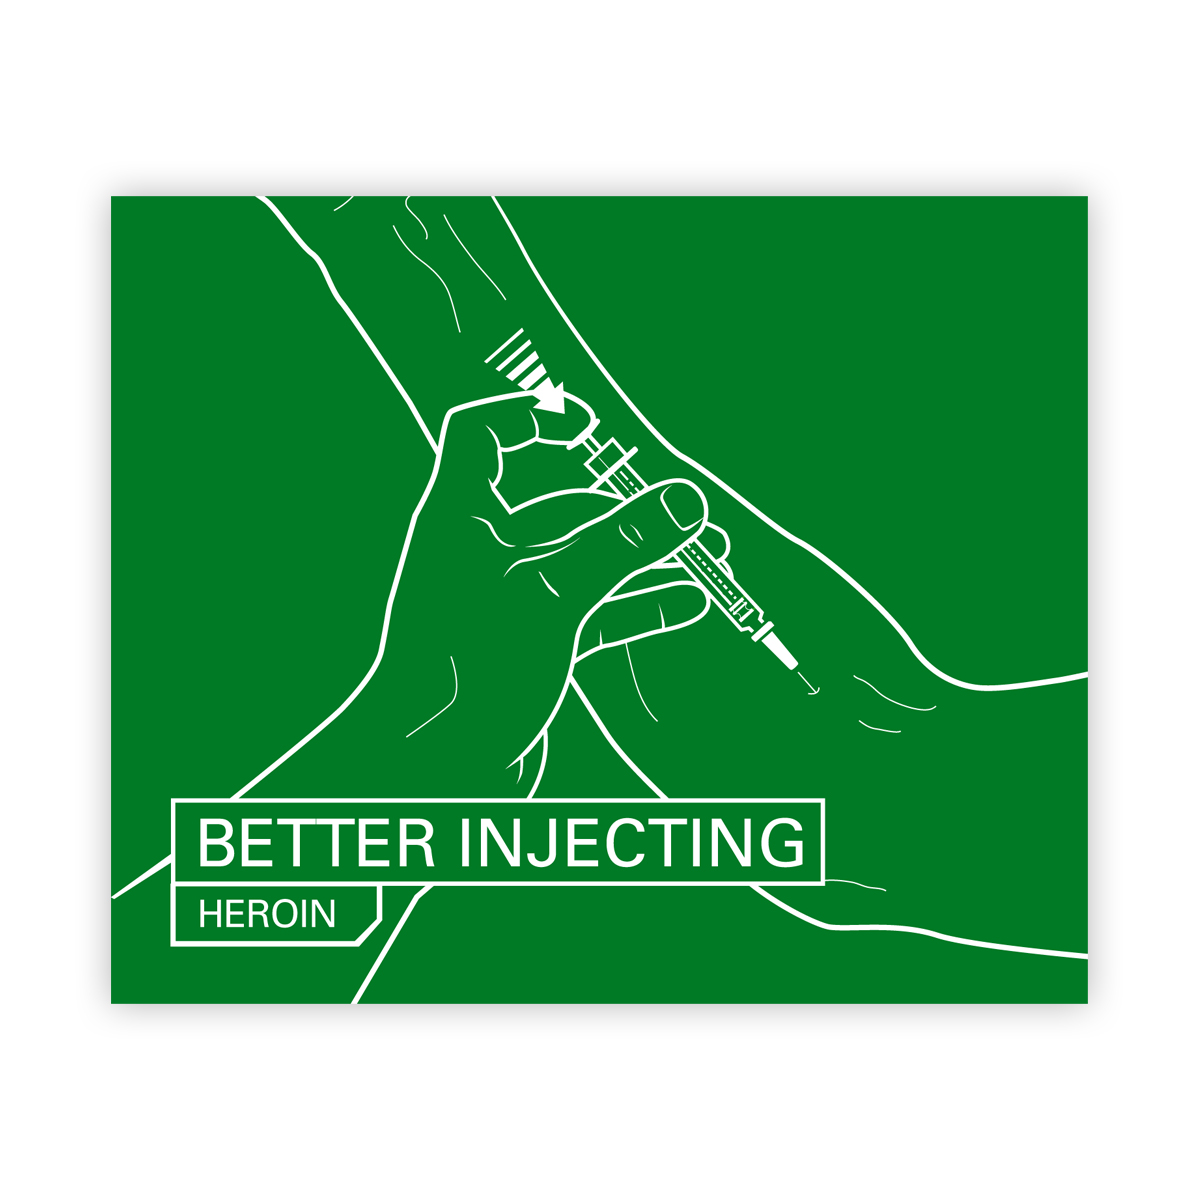 Better injecting